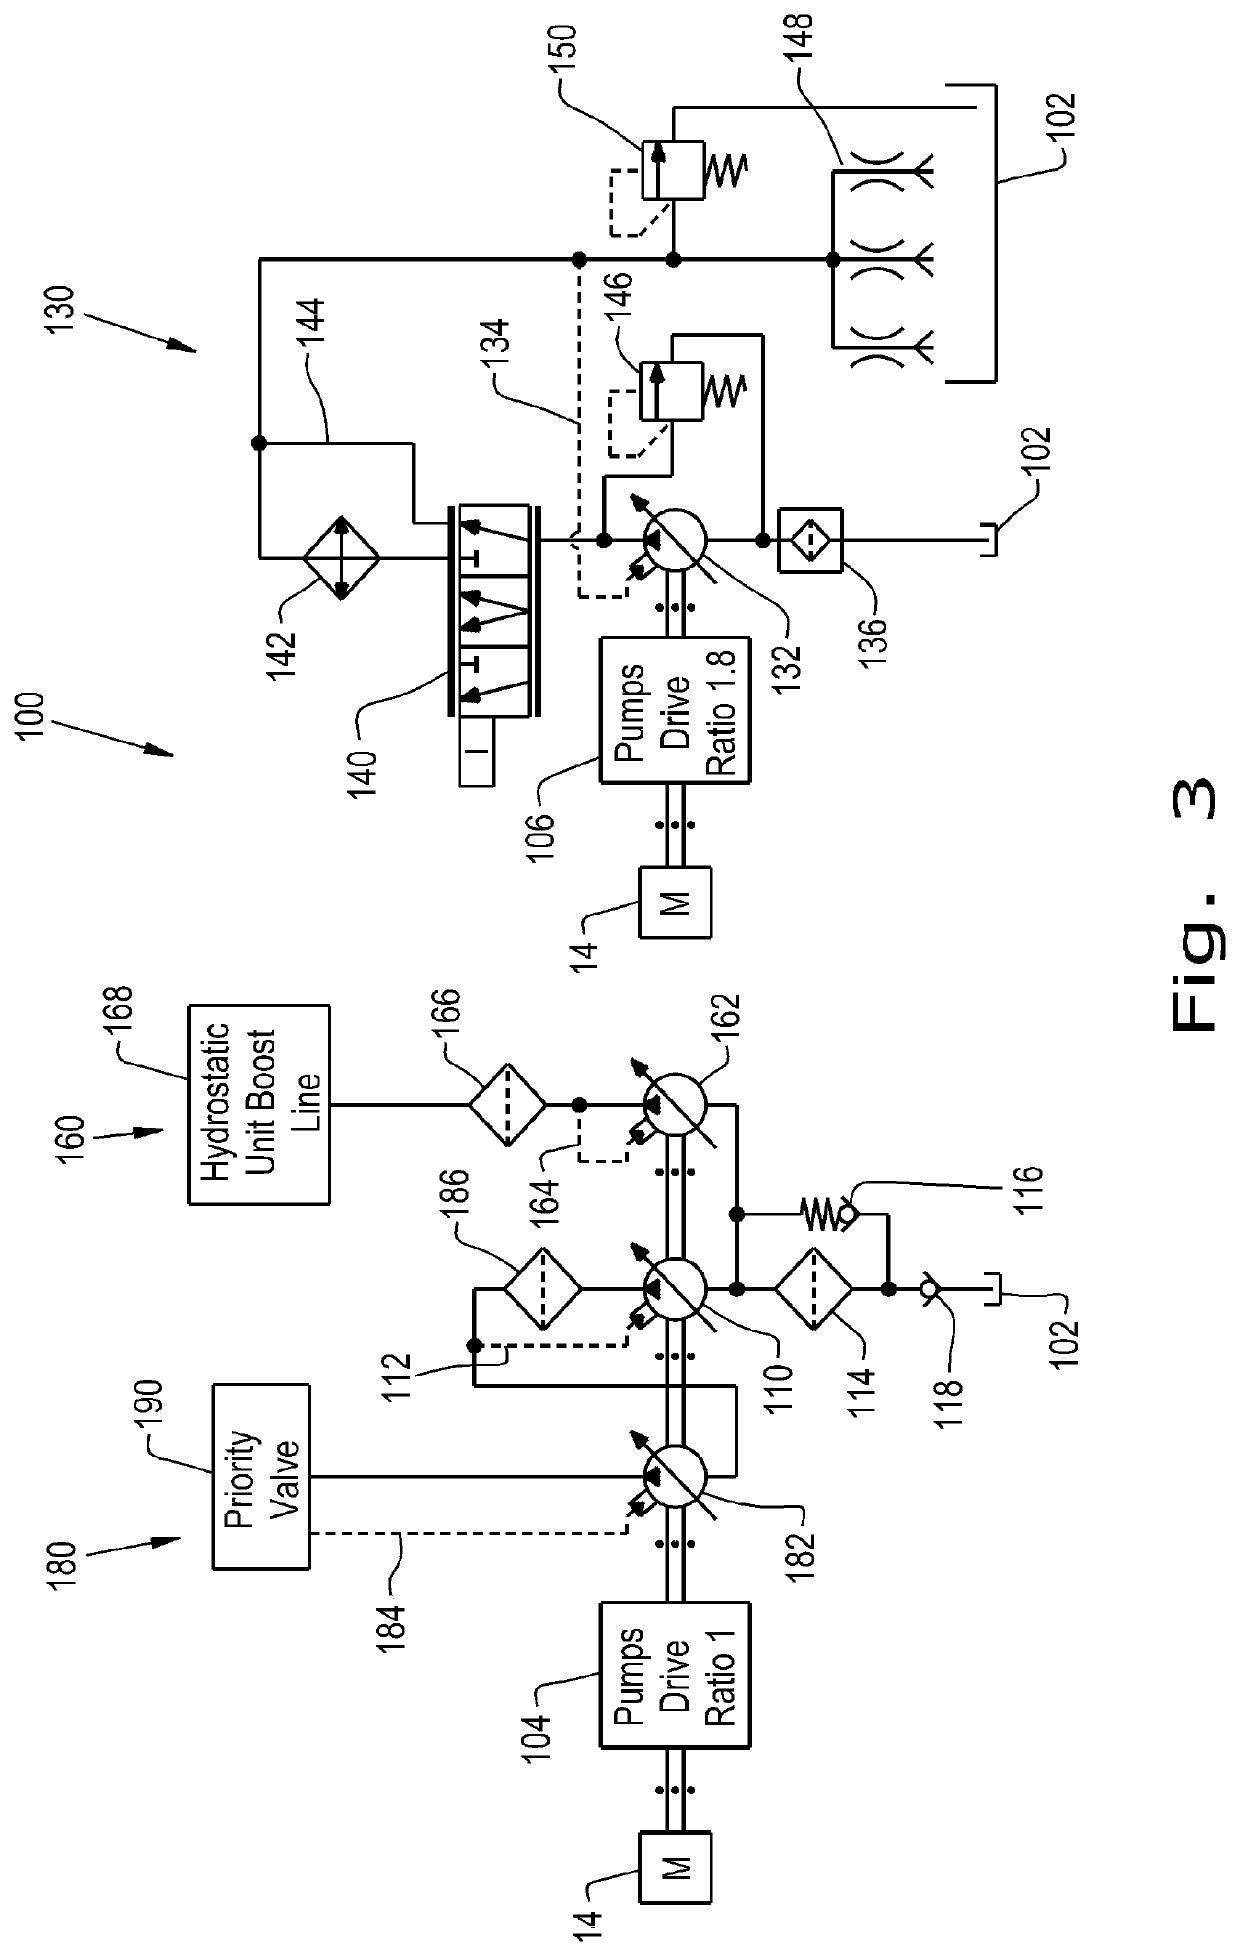 Hydraulic circuit for use on CVT vehicle